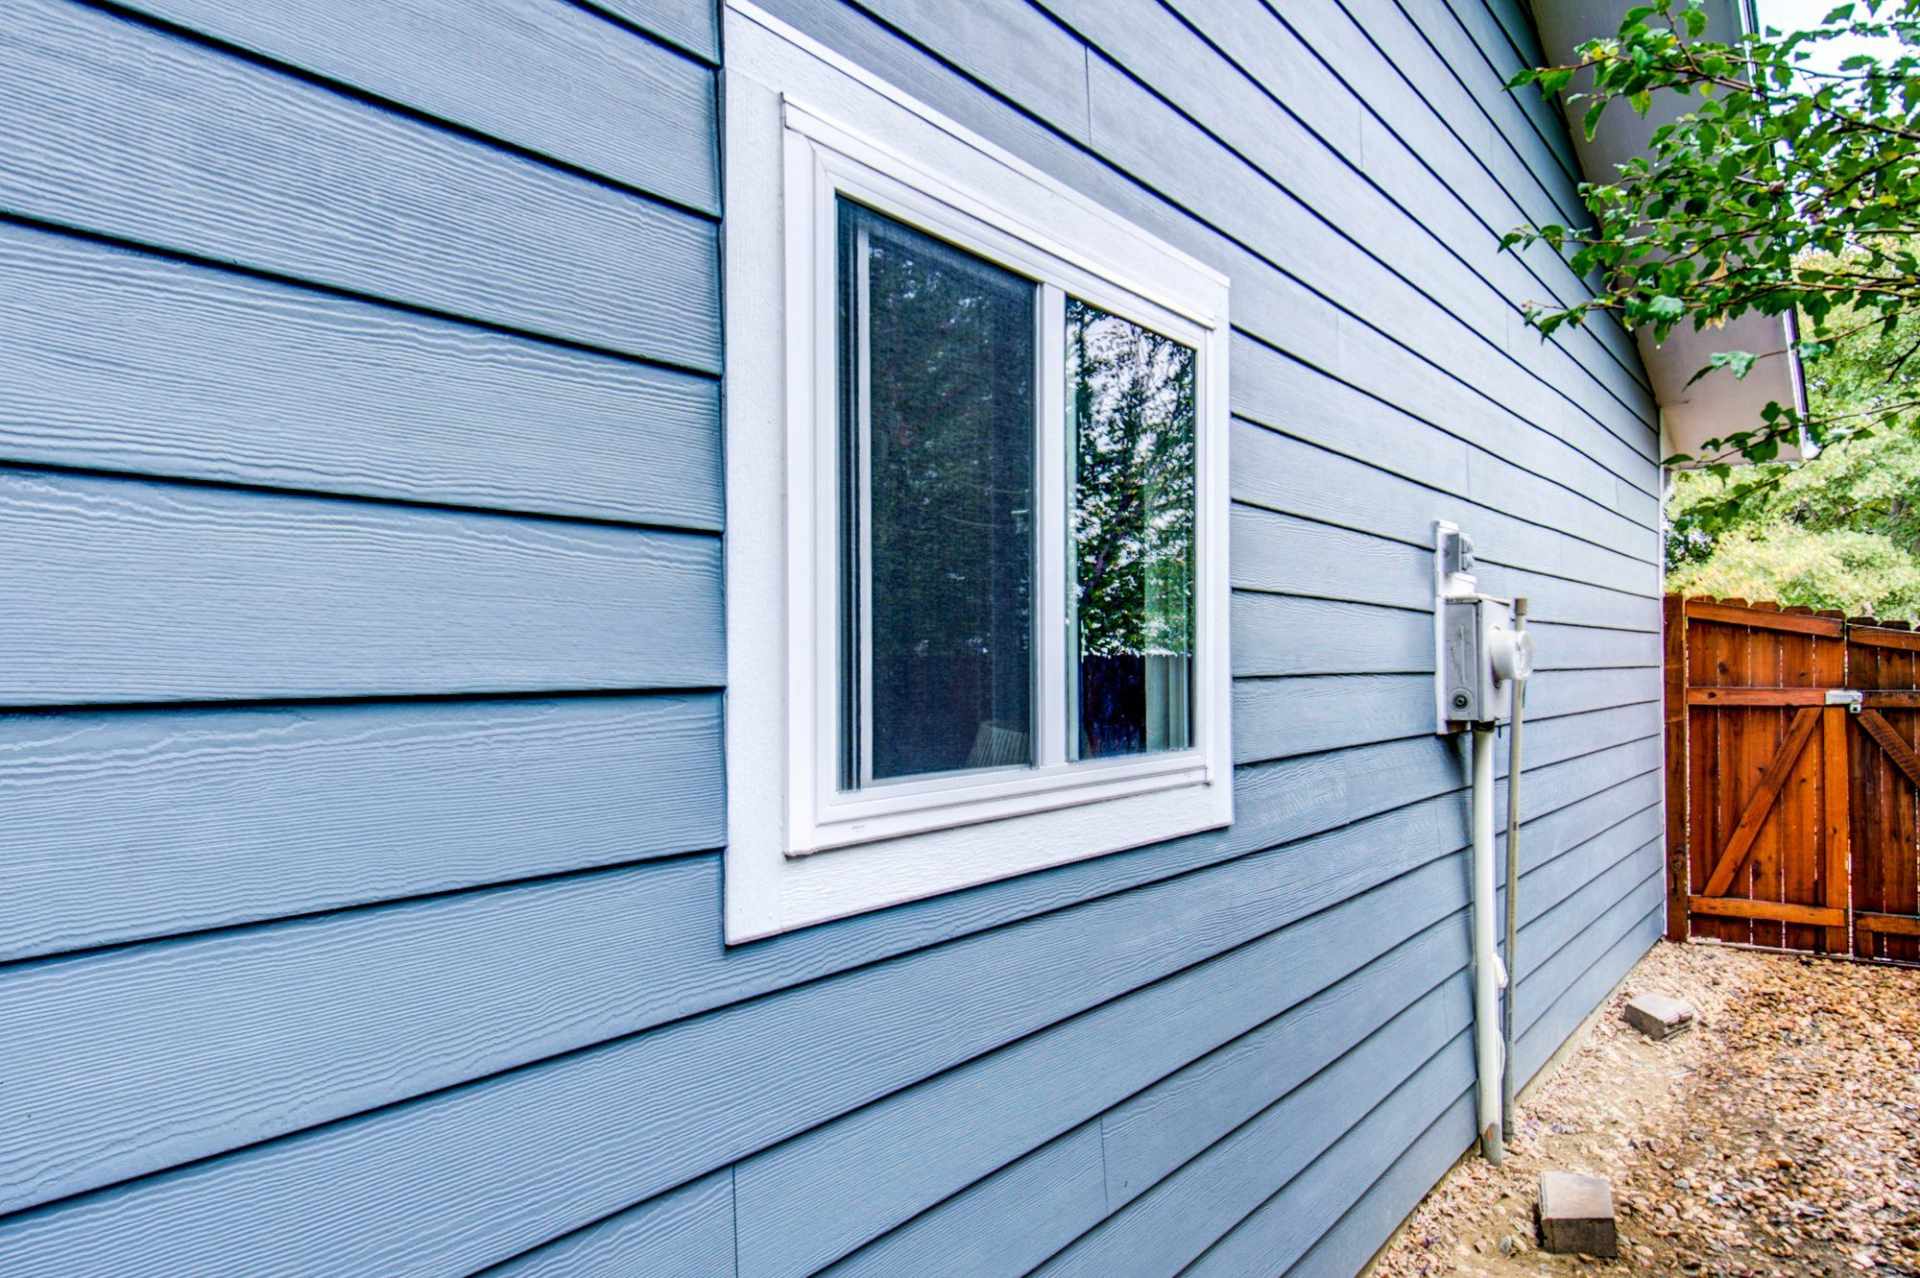 James Hardie fiber cement siding installed by Northern Lights Exteriors